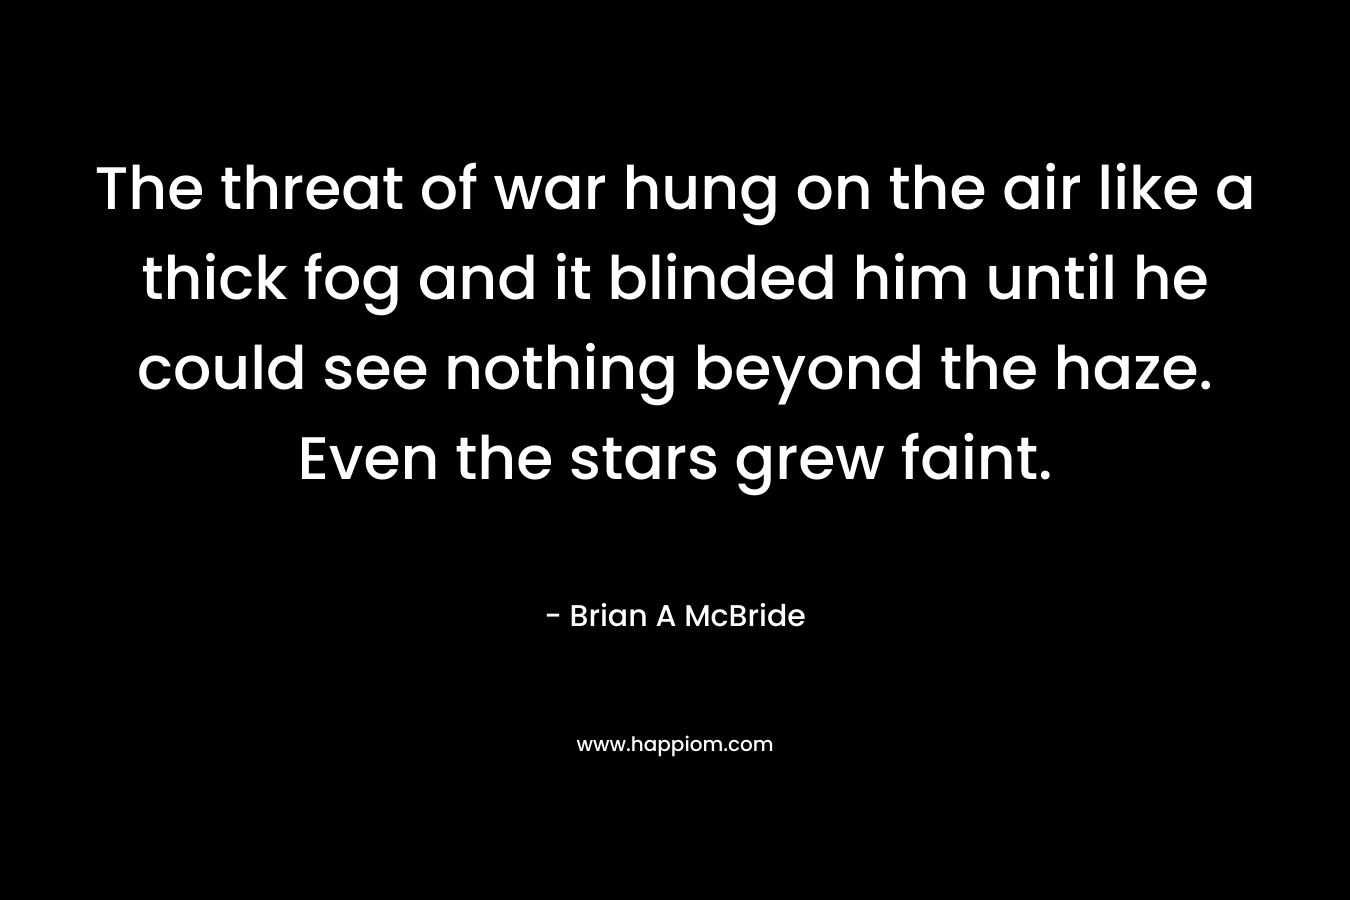 The threat of war hung on the air like a thick fog and it blinded him until he could see nothing beyond the haze. Even the stars grew faint.